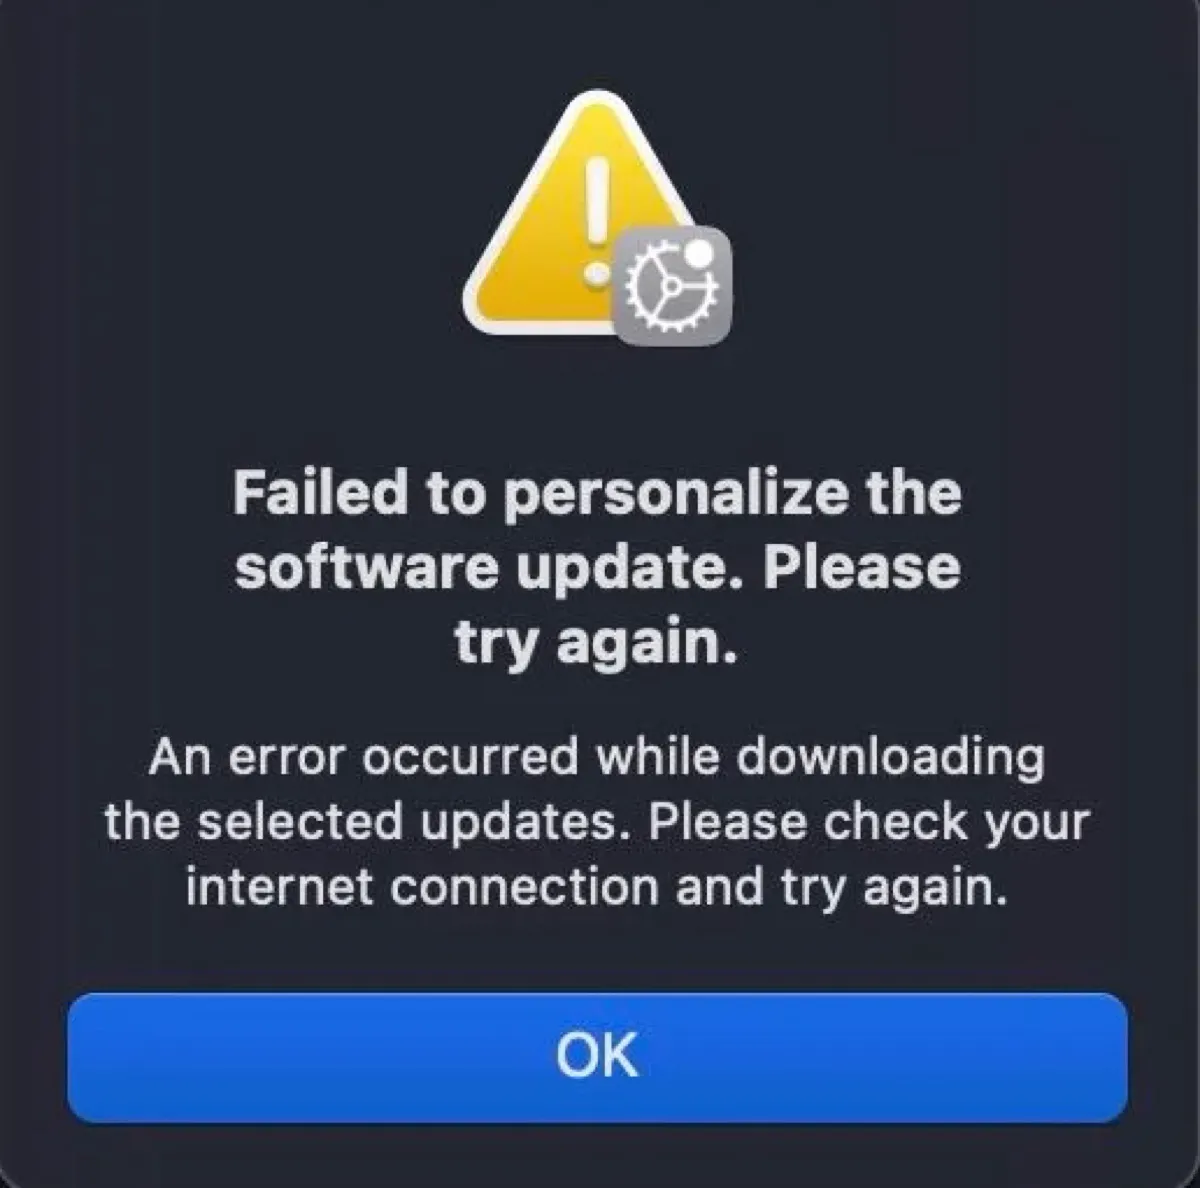 Failed to personalize the software update